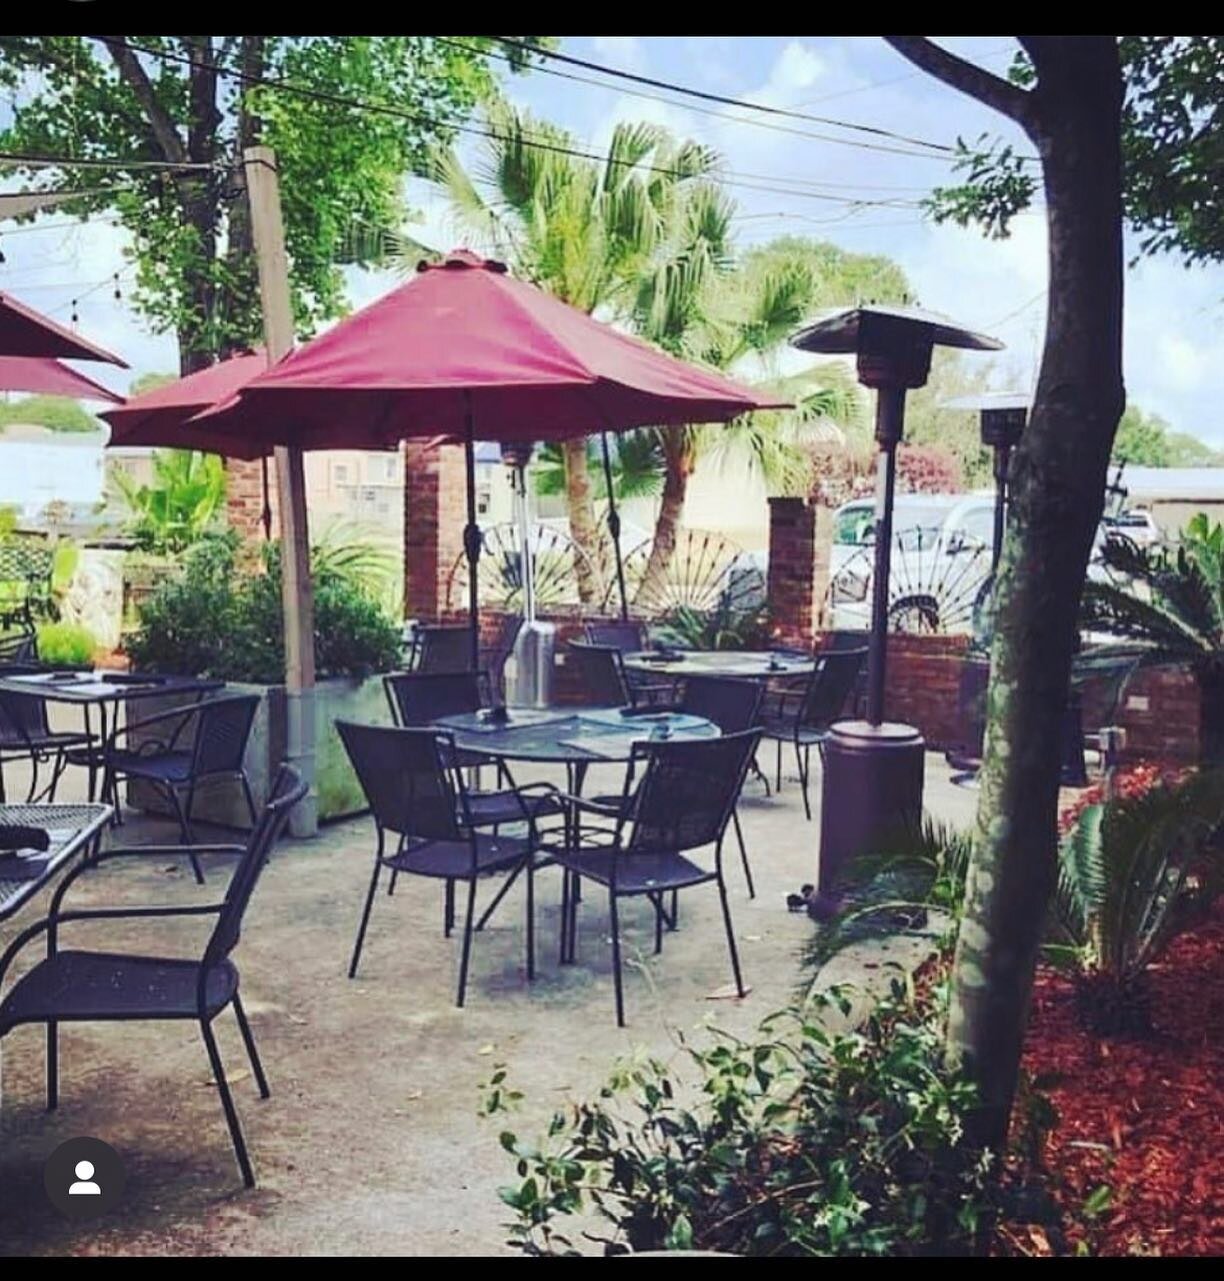 Great courtyard weather! Come dine with us on our patio.